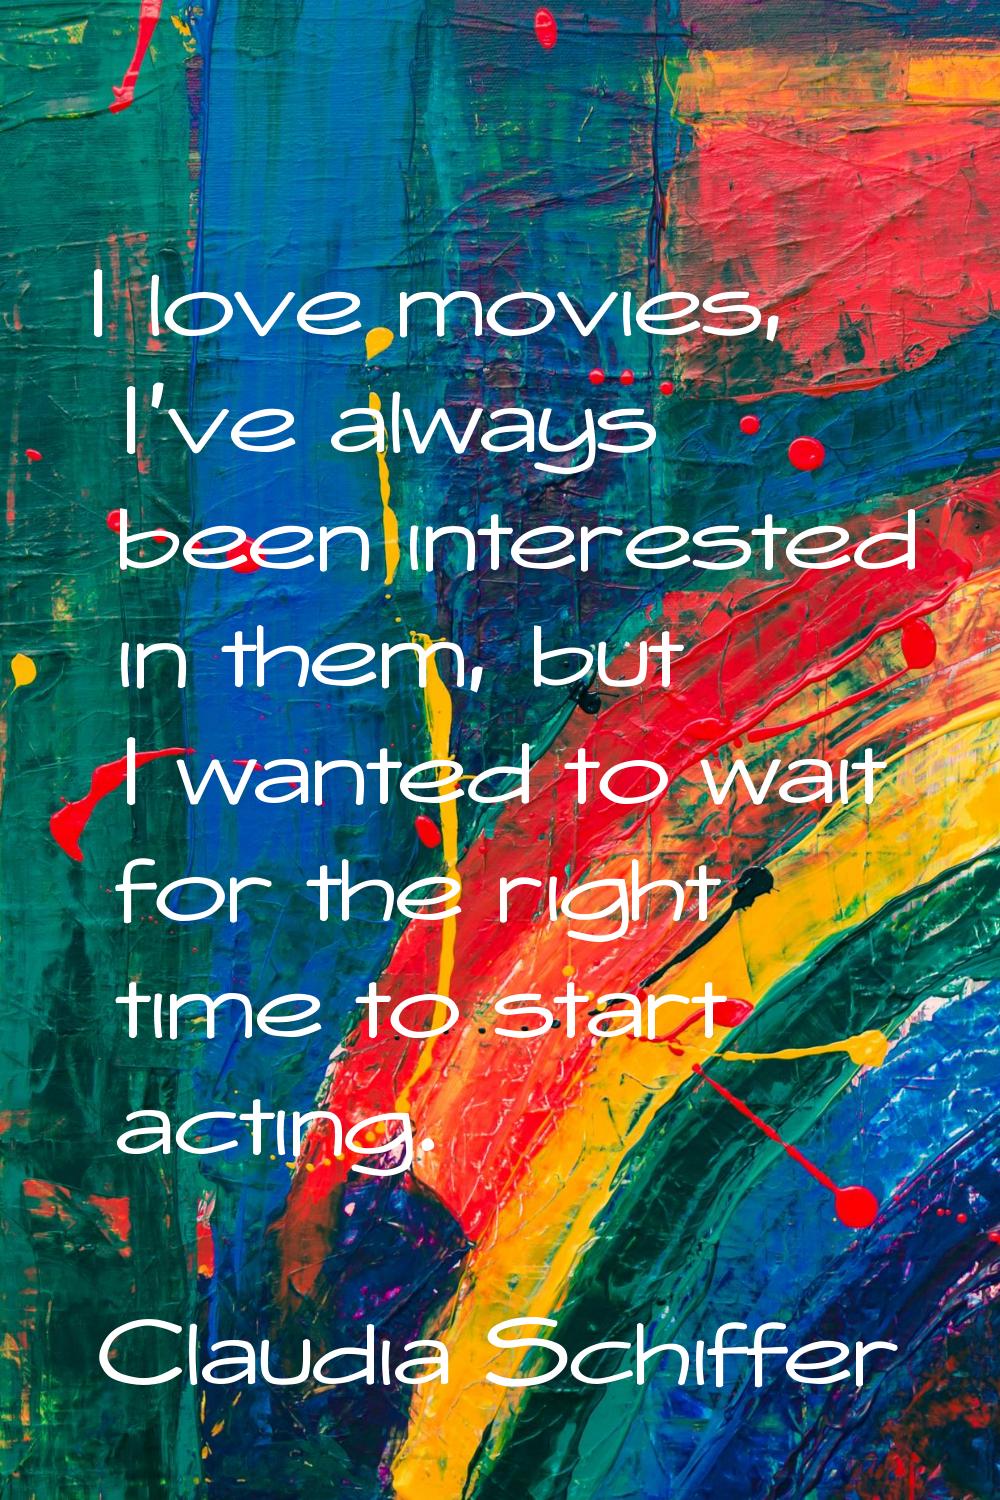 I love movies, I've always been interested in them, but I wanted to wait for the right time to star